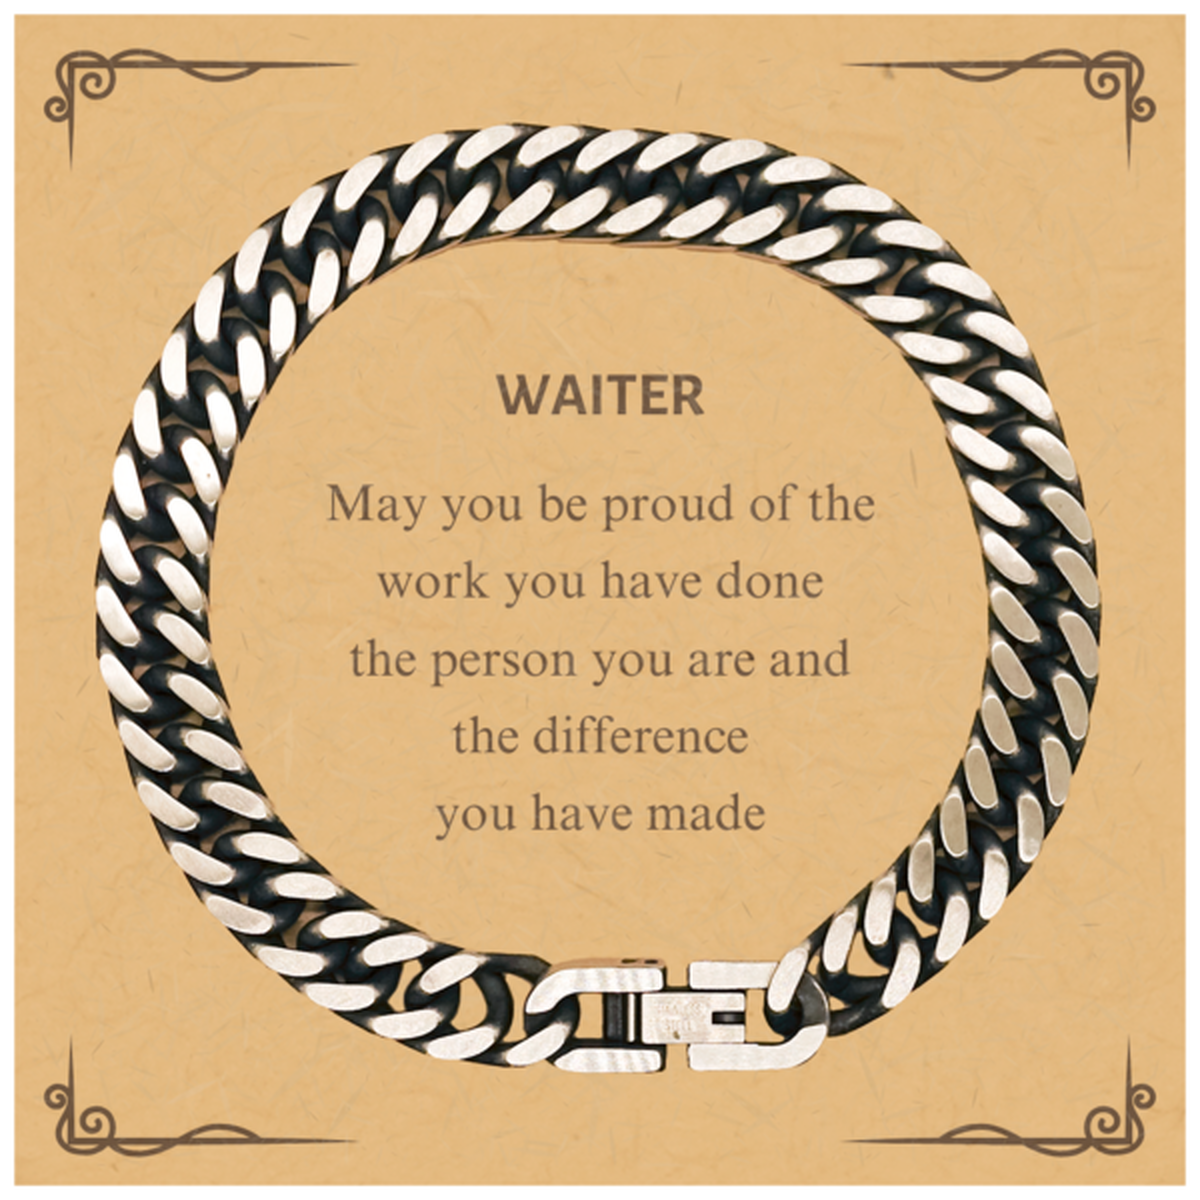 Waiter May you be proud of the work you have done, Retirement Waiter Cuban Link Chain Bracelet for Colleague Appreciation Gifts Amazing for Waiter